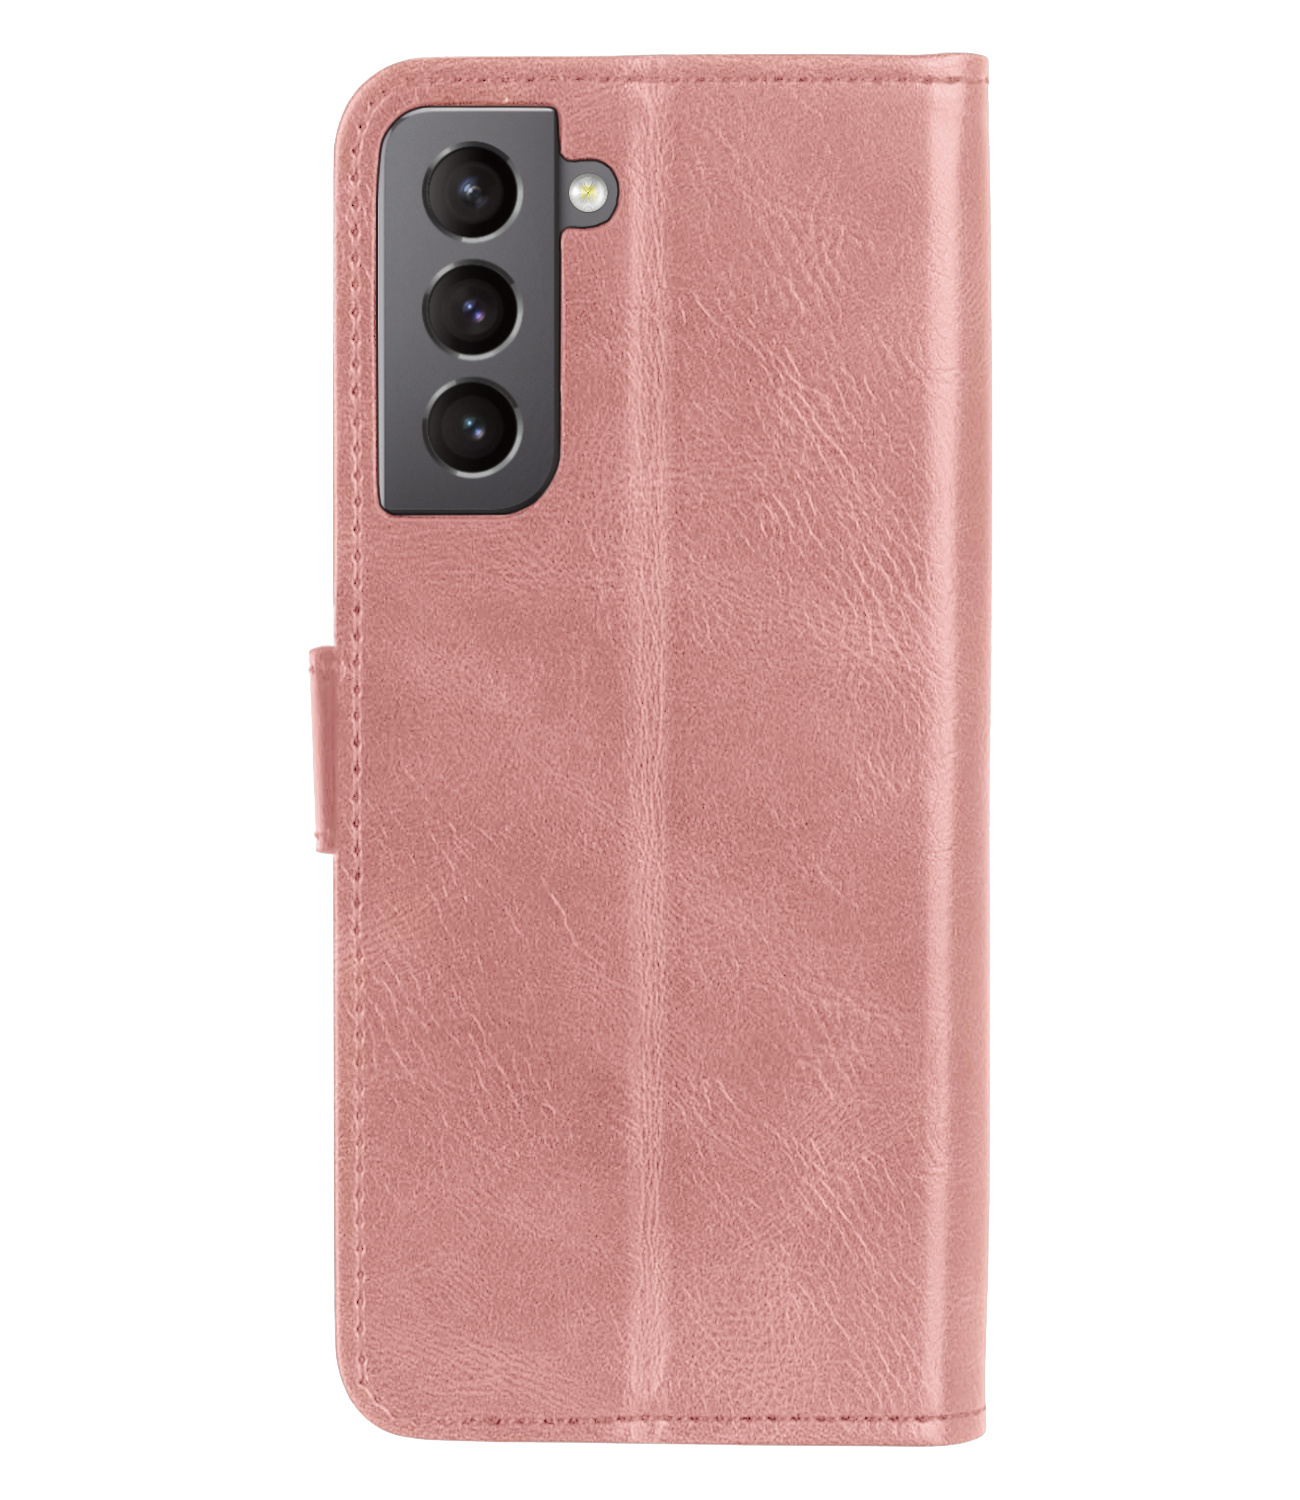 Nomfy Samsung Galaxy S21 FE Hoes Bookcase Rose Goud - Samsung Galaxy S21 FE Book Cover Flipcase - Samsung Galaxy S21 FE Hoesje - Rose Goud